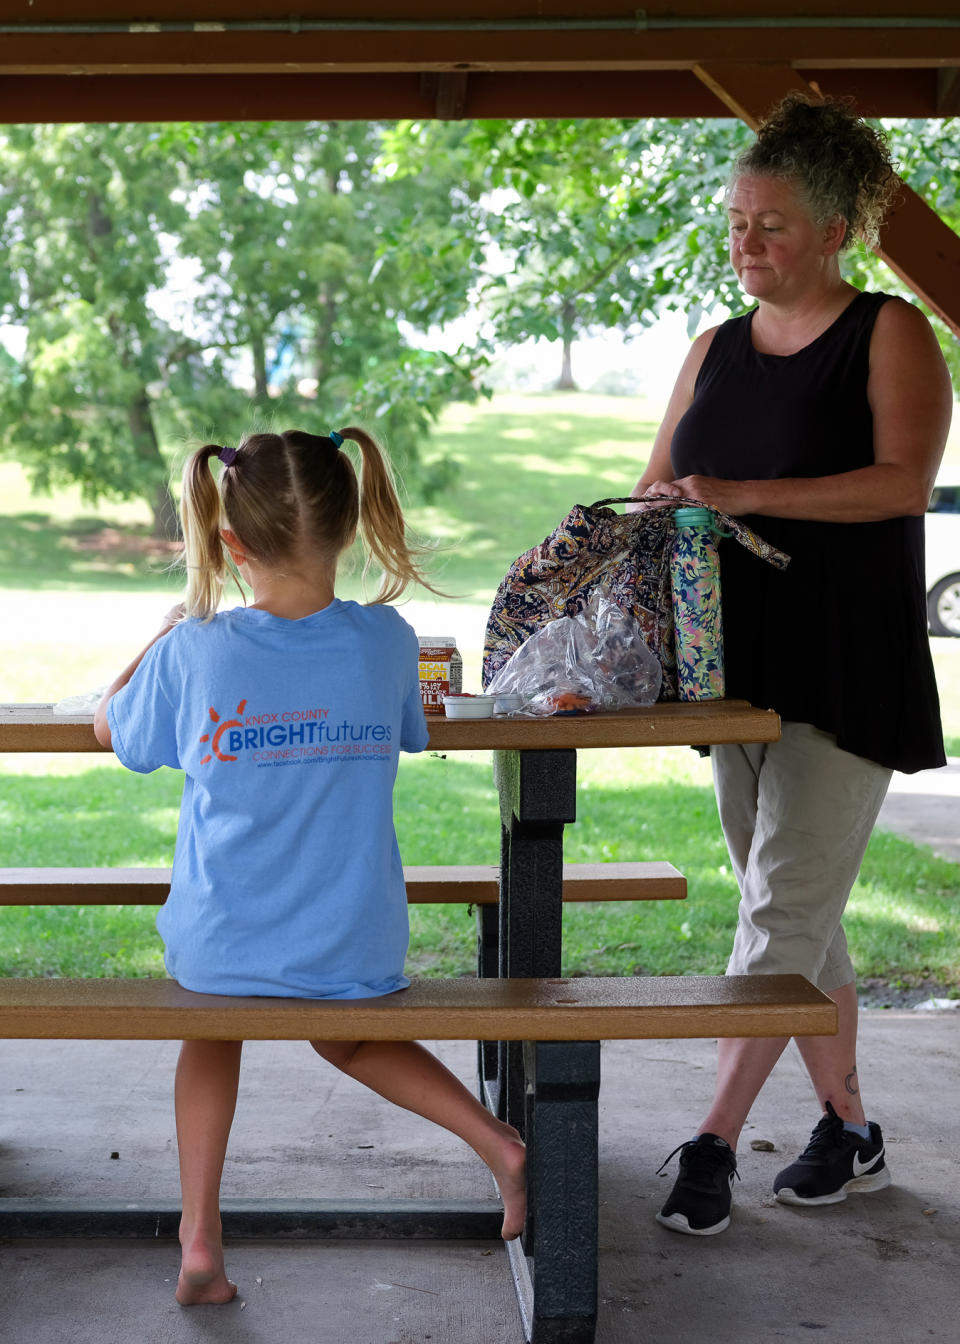 Image: Erin McAlvany at a meal site in Kirksville, Mo. on  Aug.16, 2022. (Arin Yoon for NBC News)